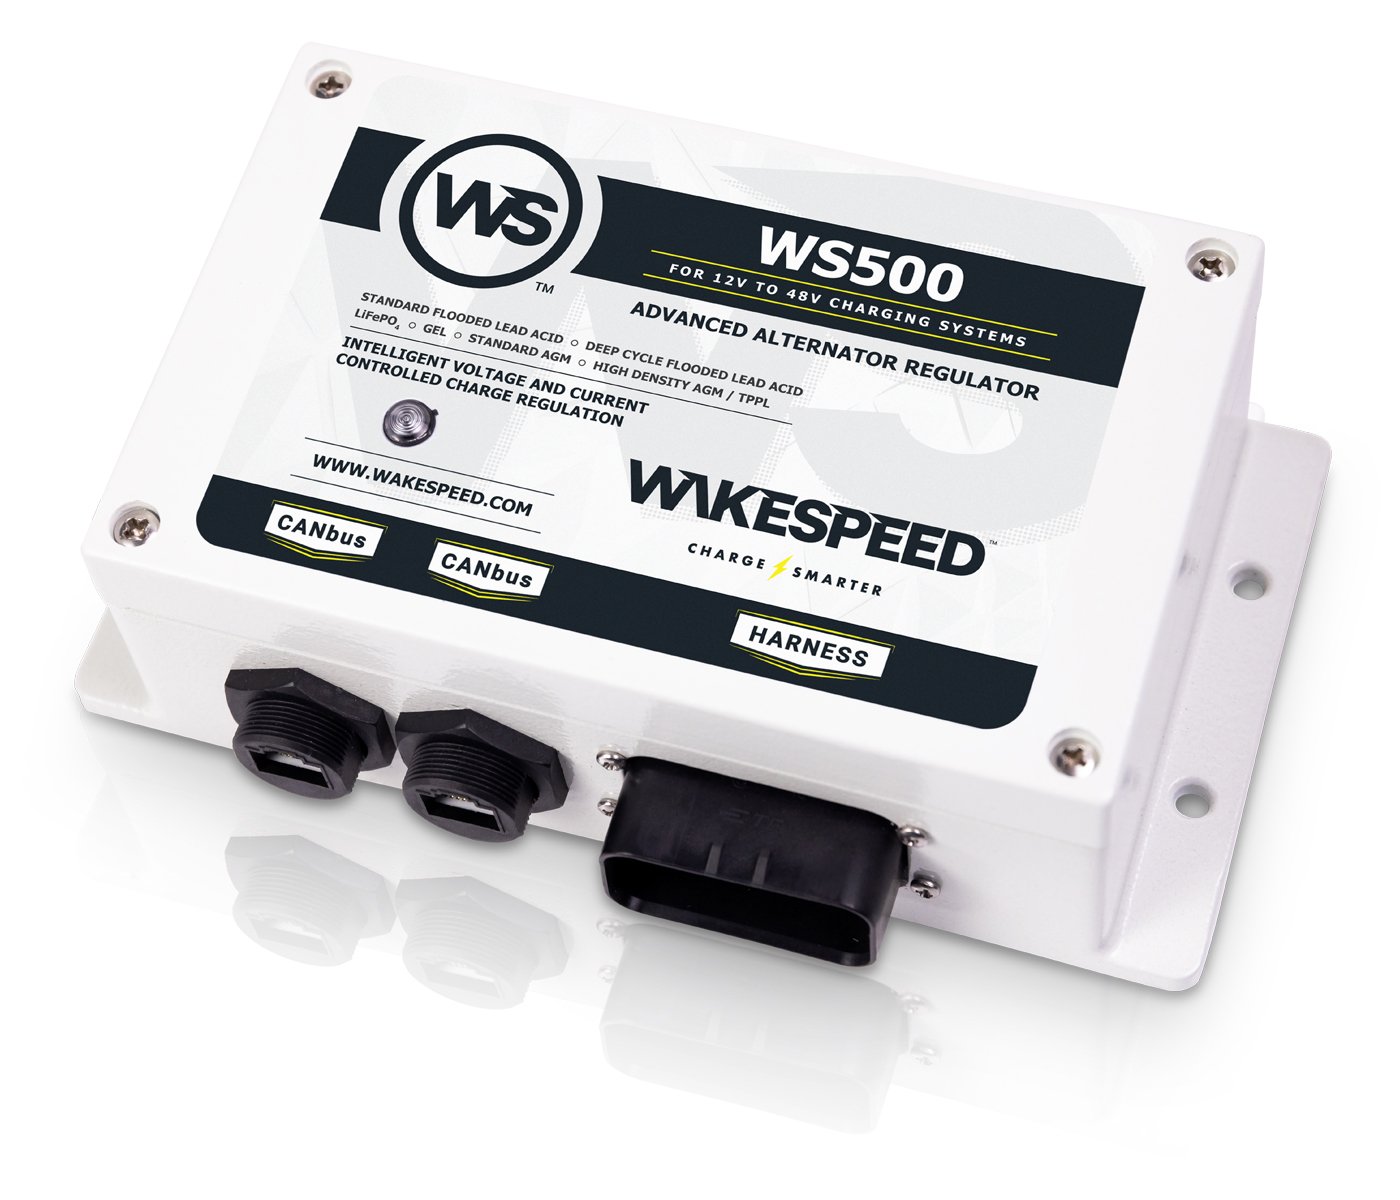 Does the WS500 come with a wiring harness?